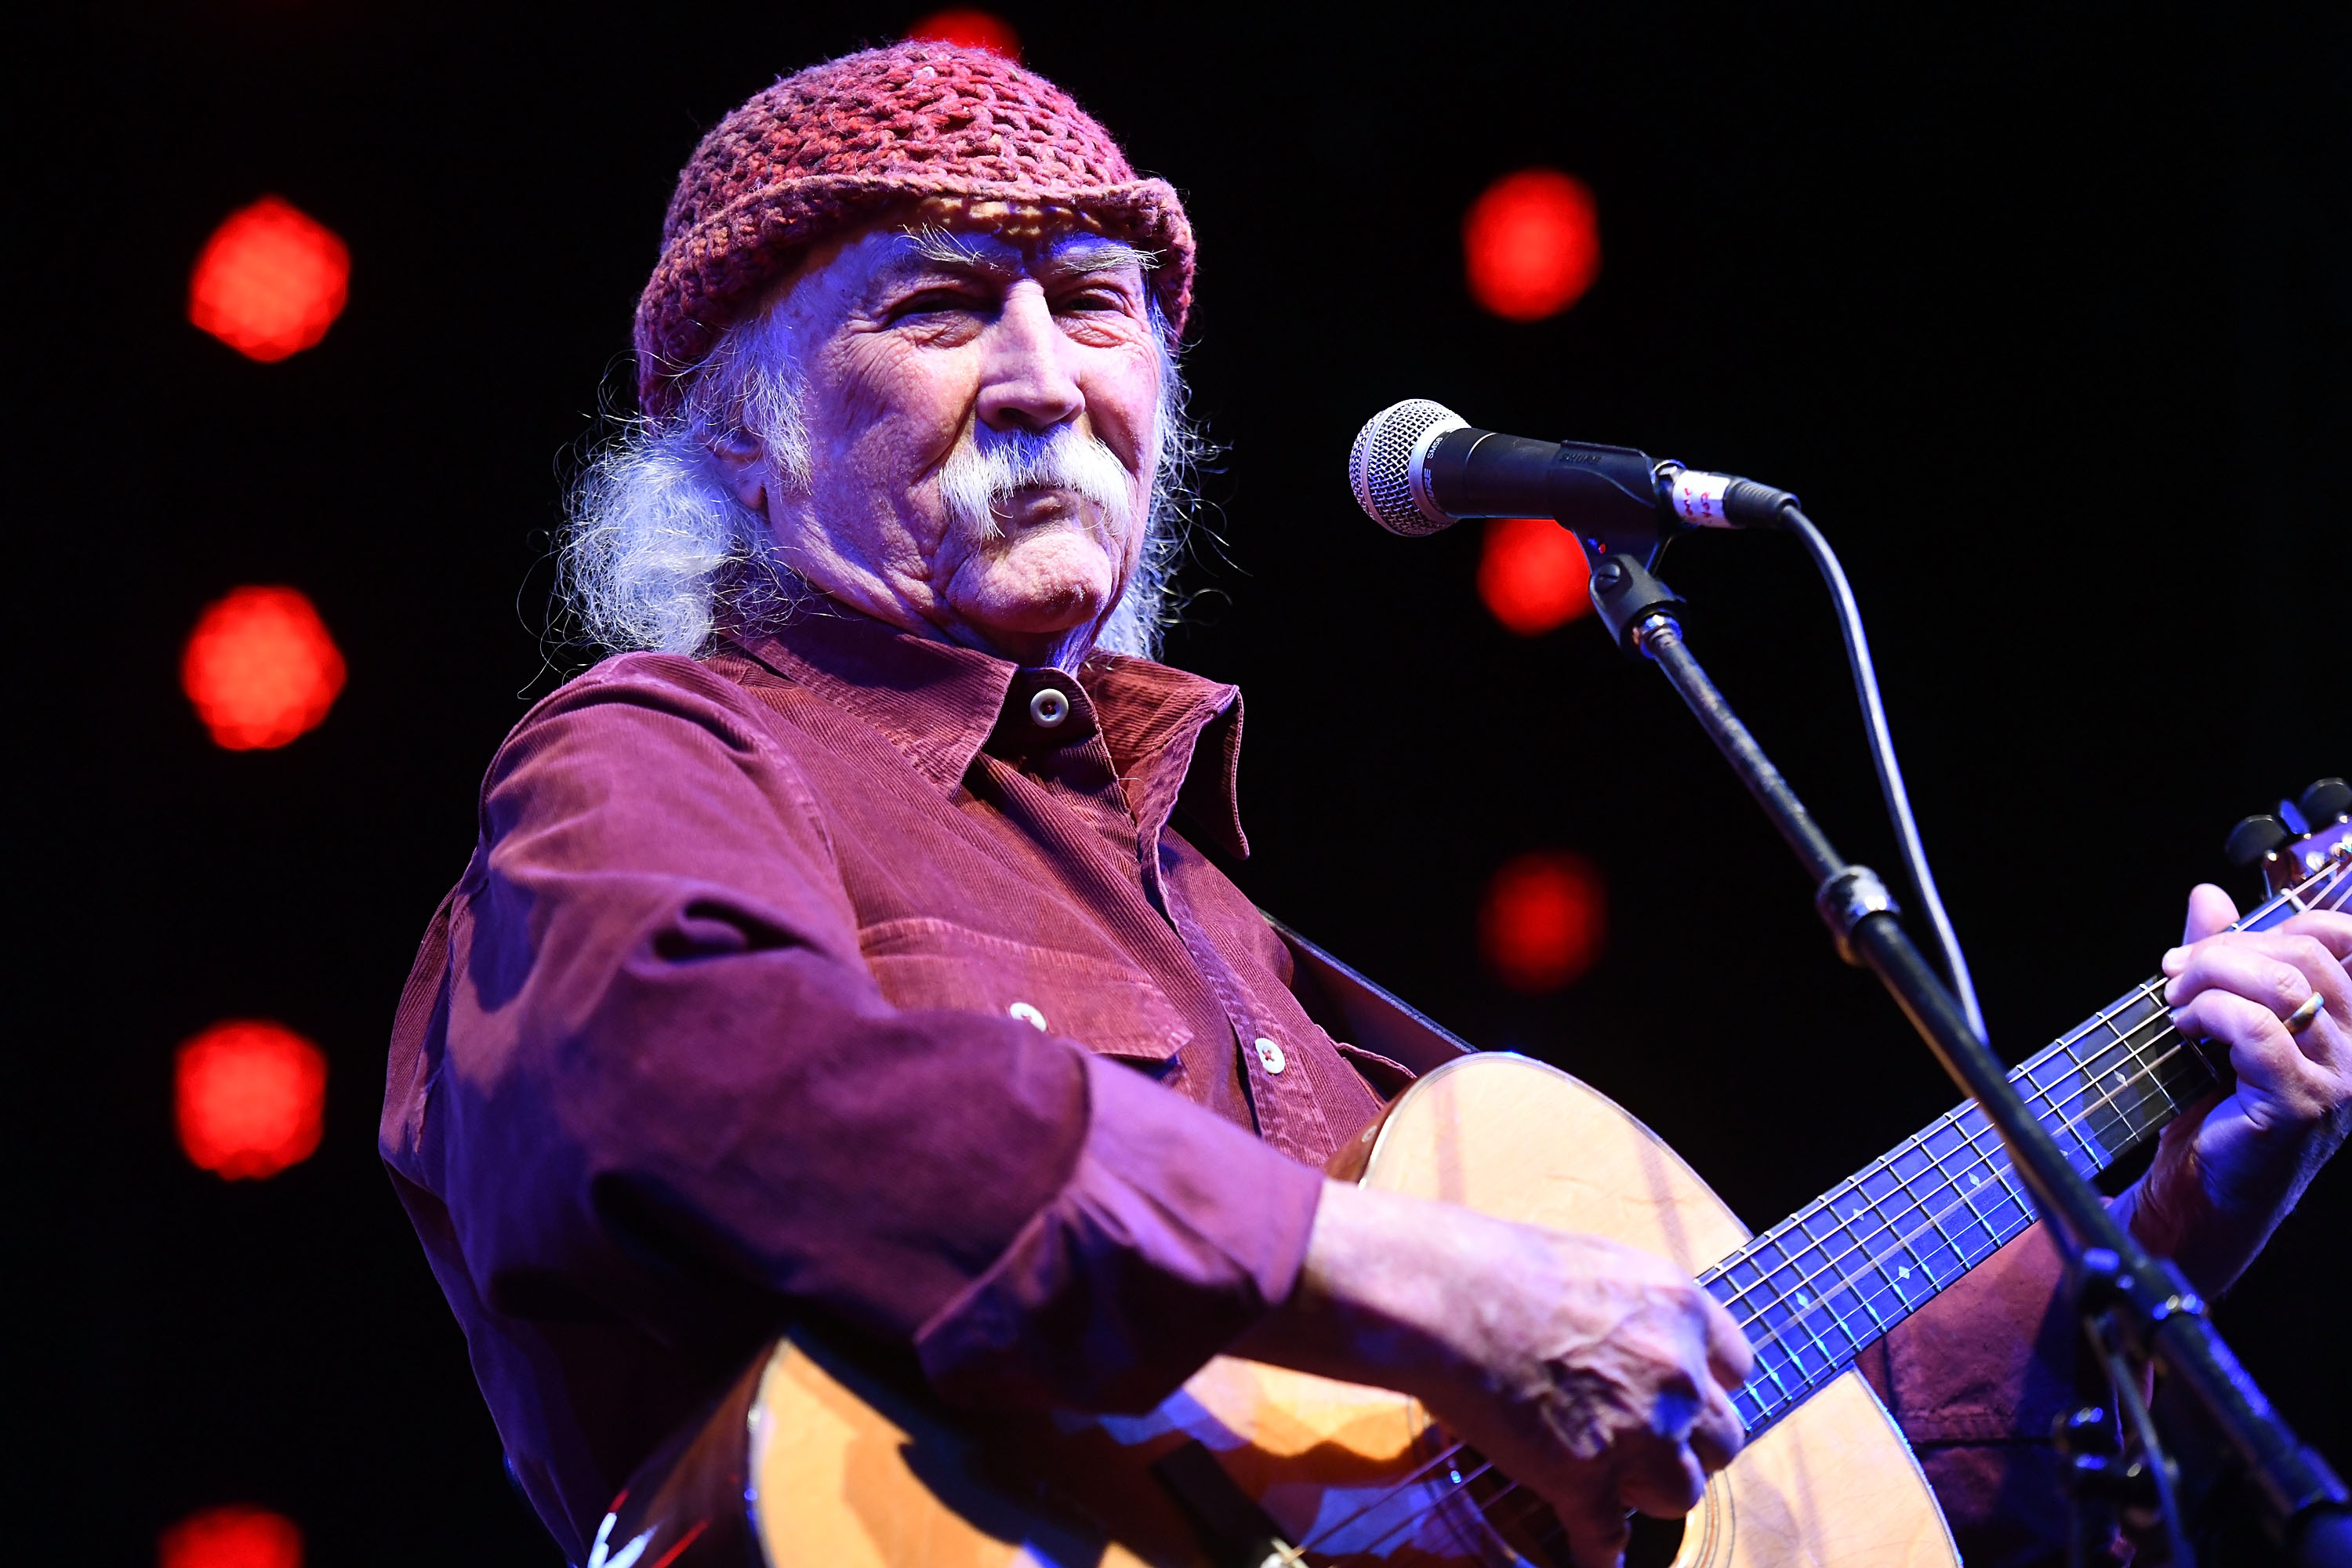 Rock and Roll Hall of Fame member David Crosby, founder of The Byrds and Crosby, Stills and Nash, performs onstage during a benefit for first responders in Carpinteria, Calif., Feb. 25, 2018. (Scott Dudelson—Getty Images)